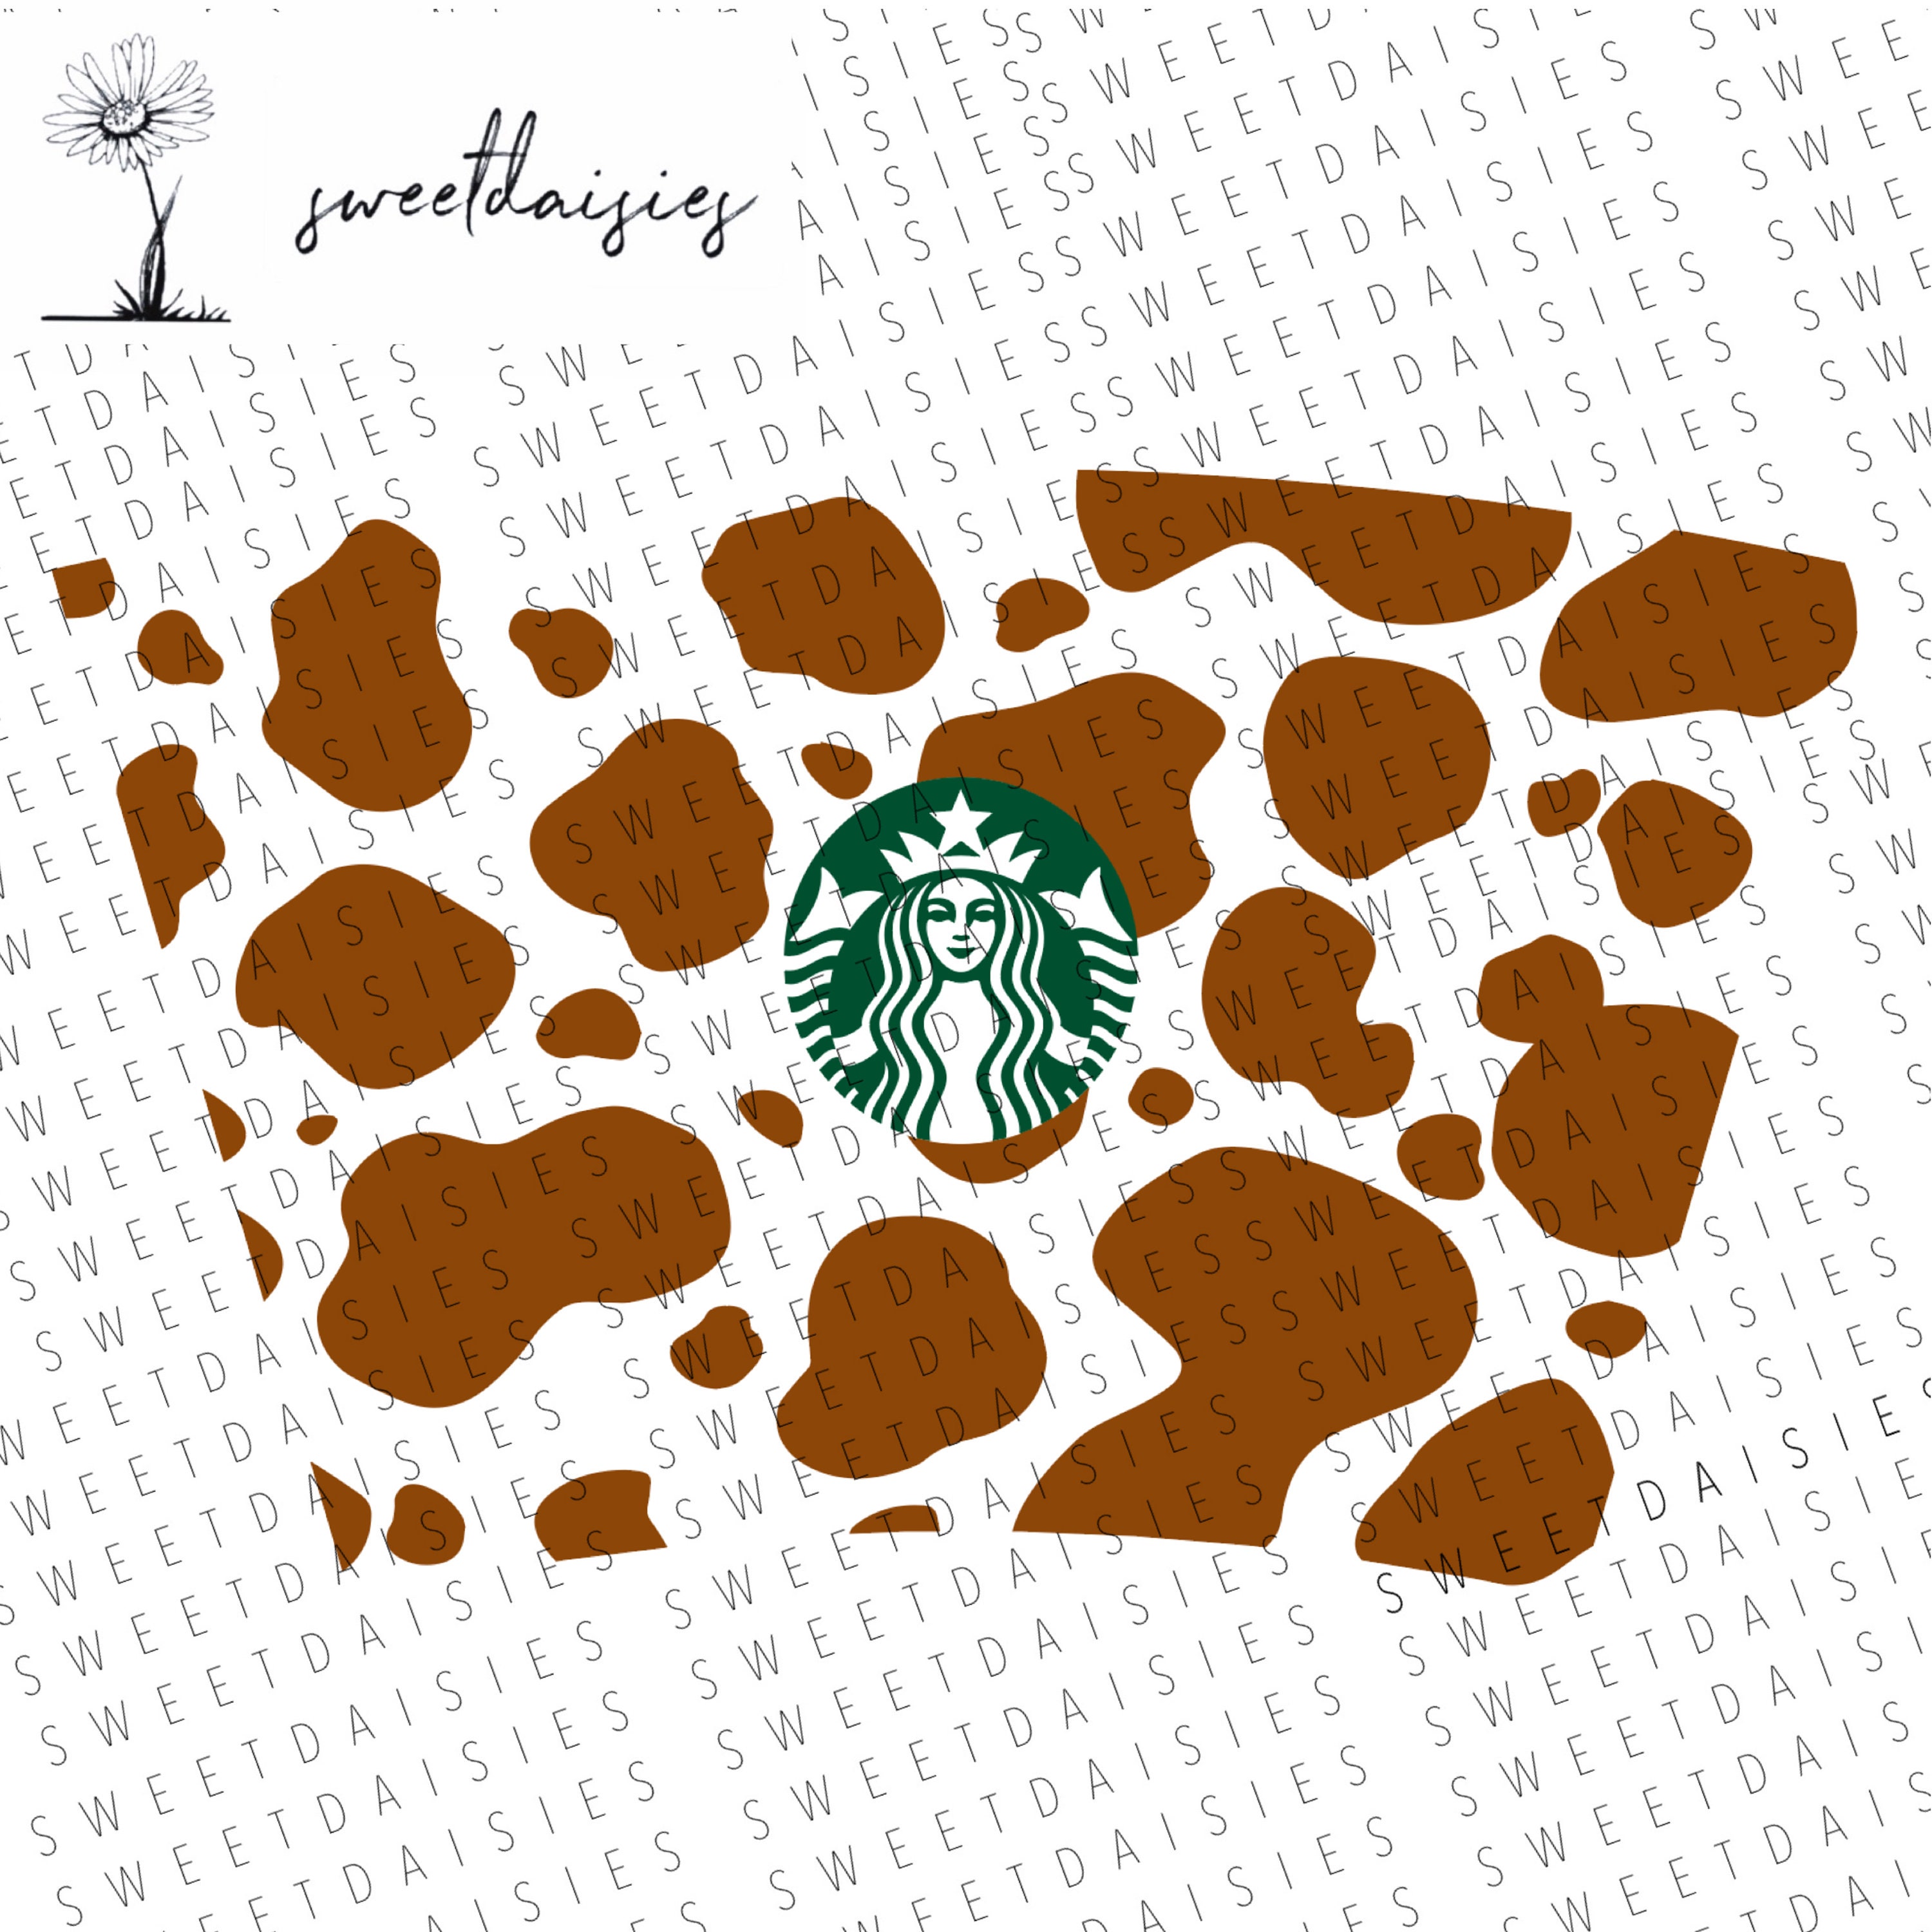 Personalised Cow Print Starbucks Cup🐄 – Lolli & Dolli Gifts